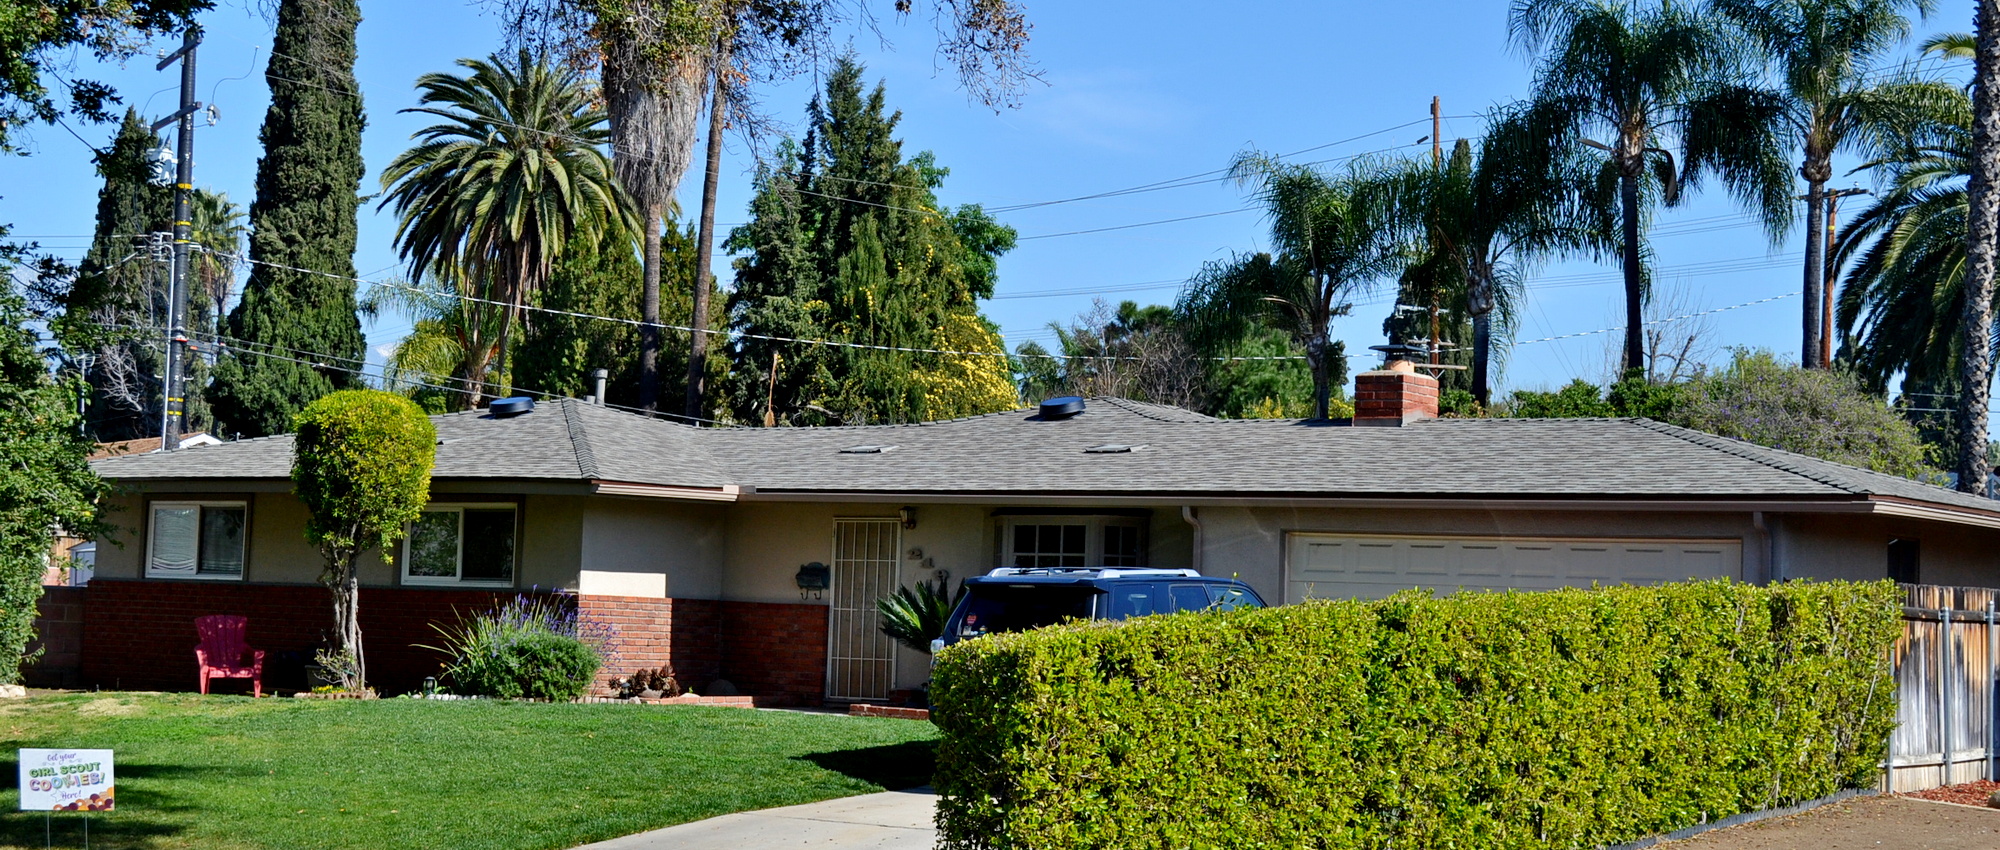 Project: Roofing Replacement in Redlands